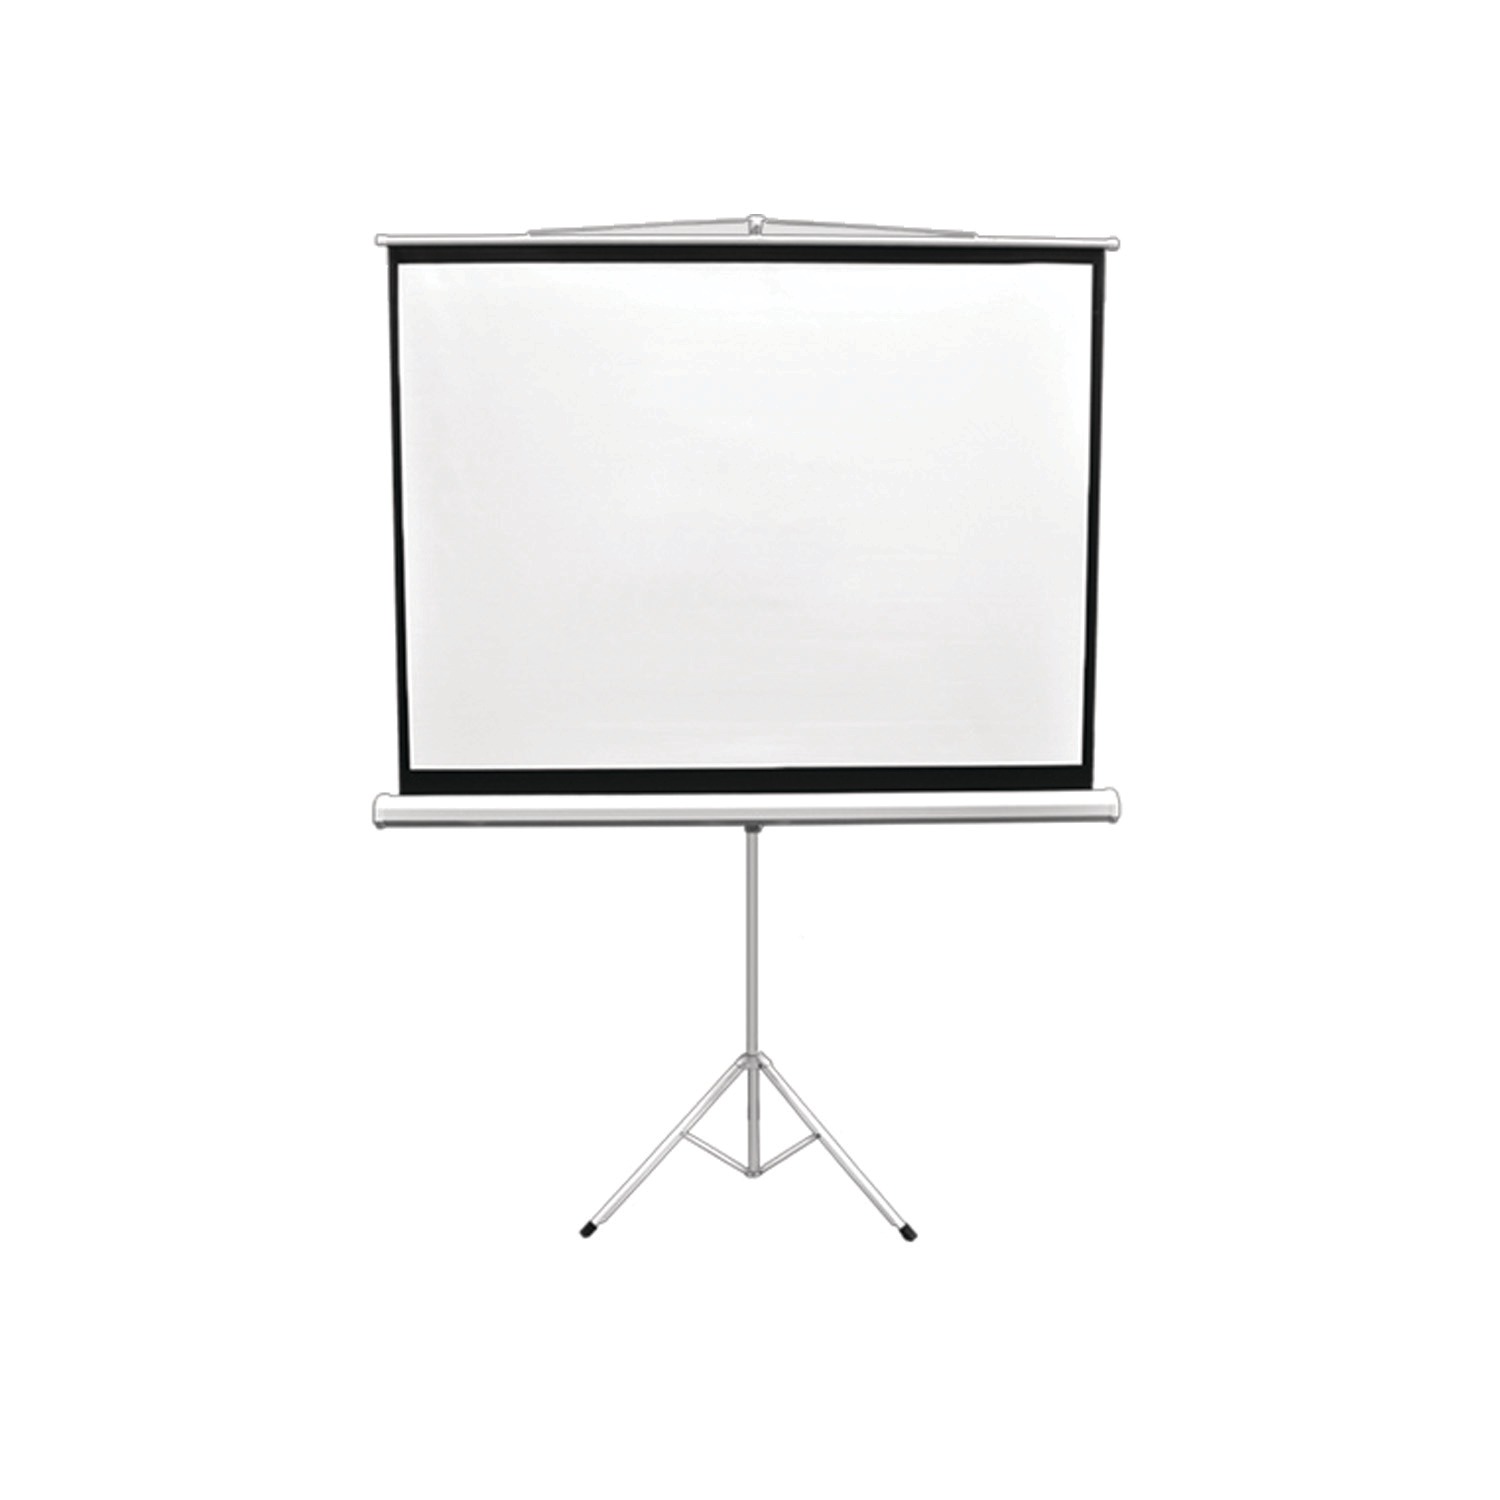 Pyle® Floor-standing Portable Tr Manual Projector Screen (84-inch) - image 3 of 5